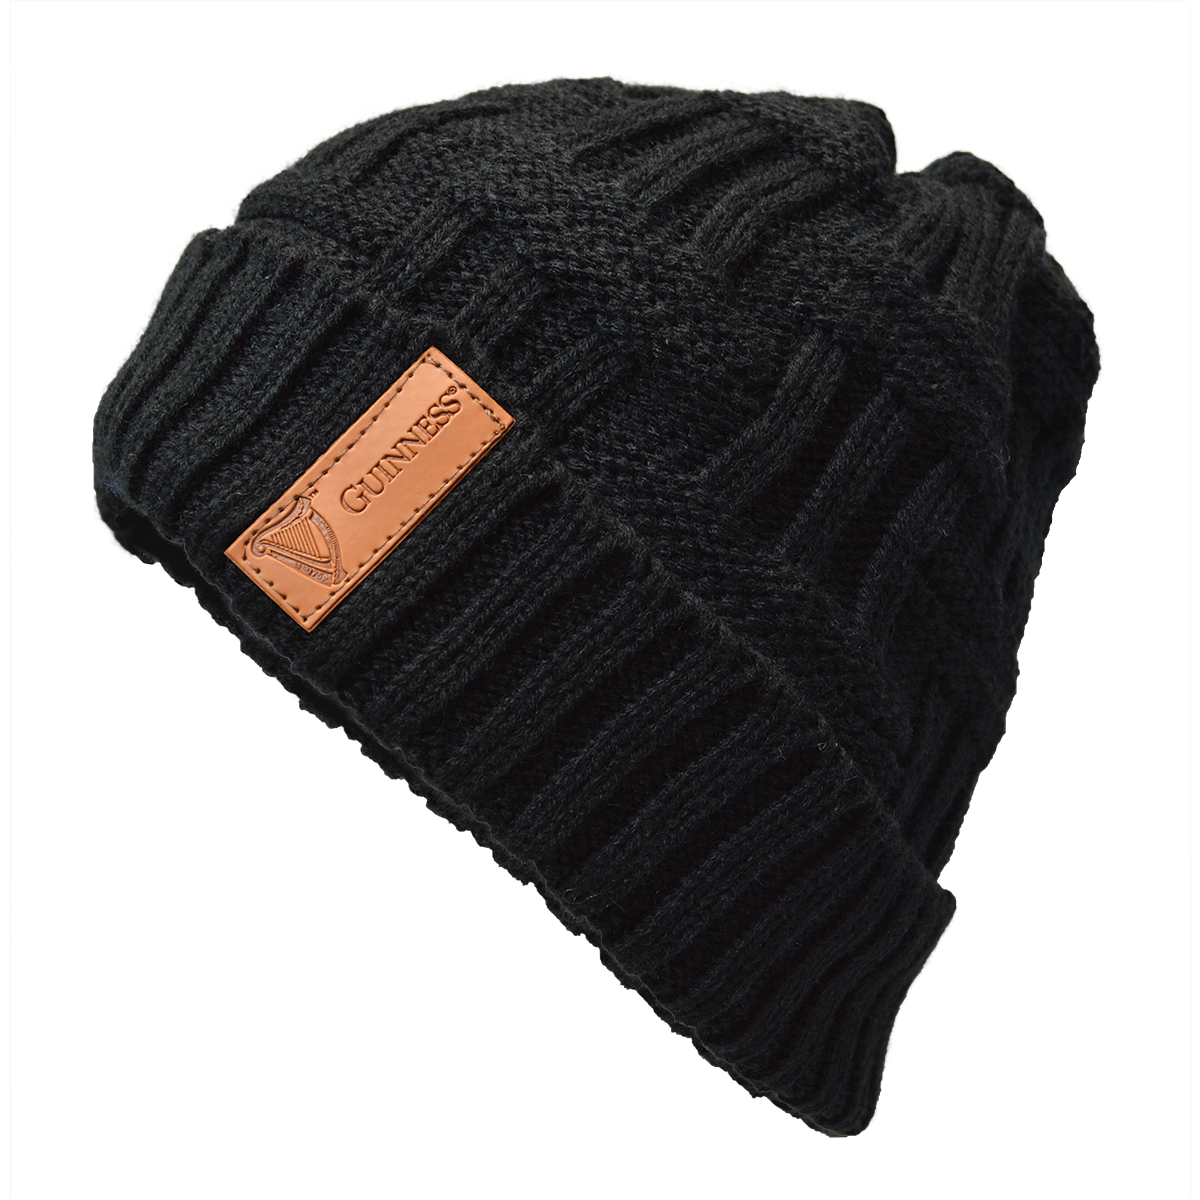 A super warm Guinness Black Leather Patch Beanie.